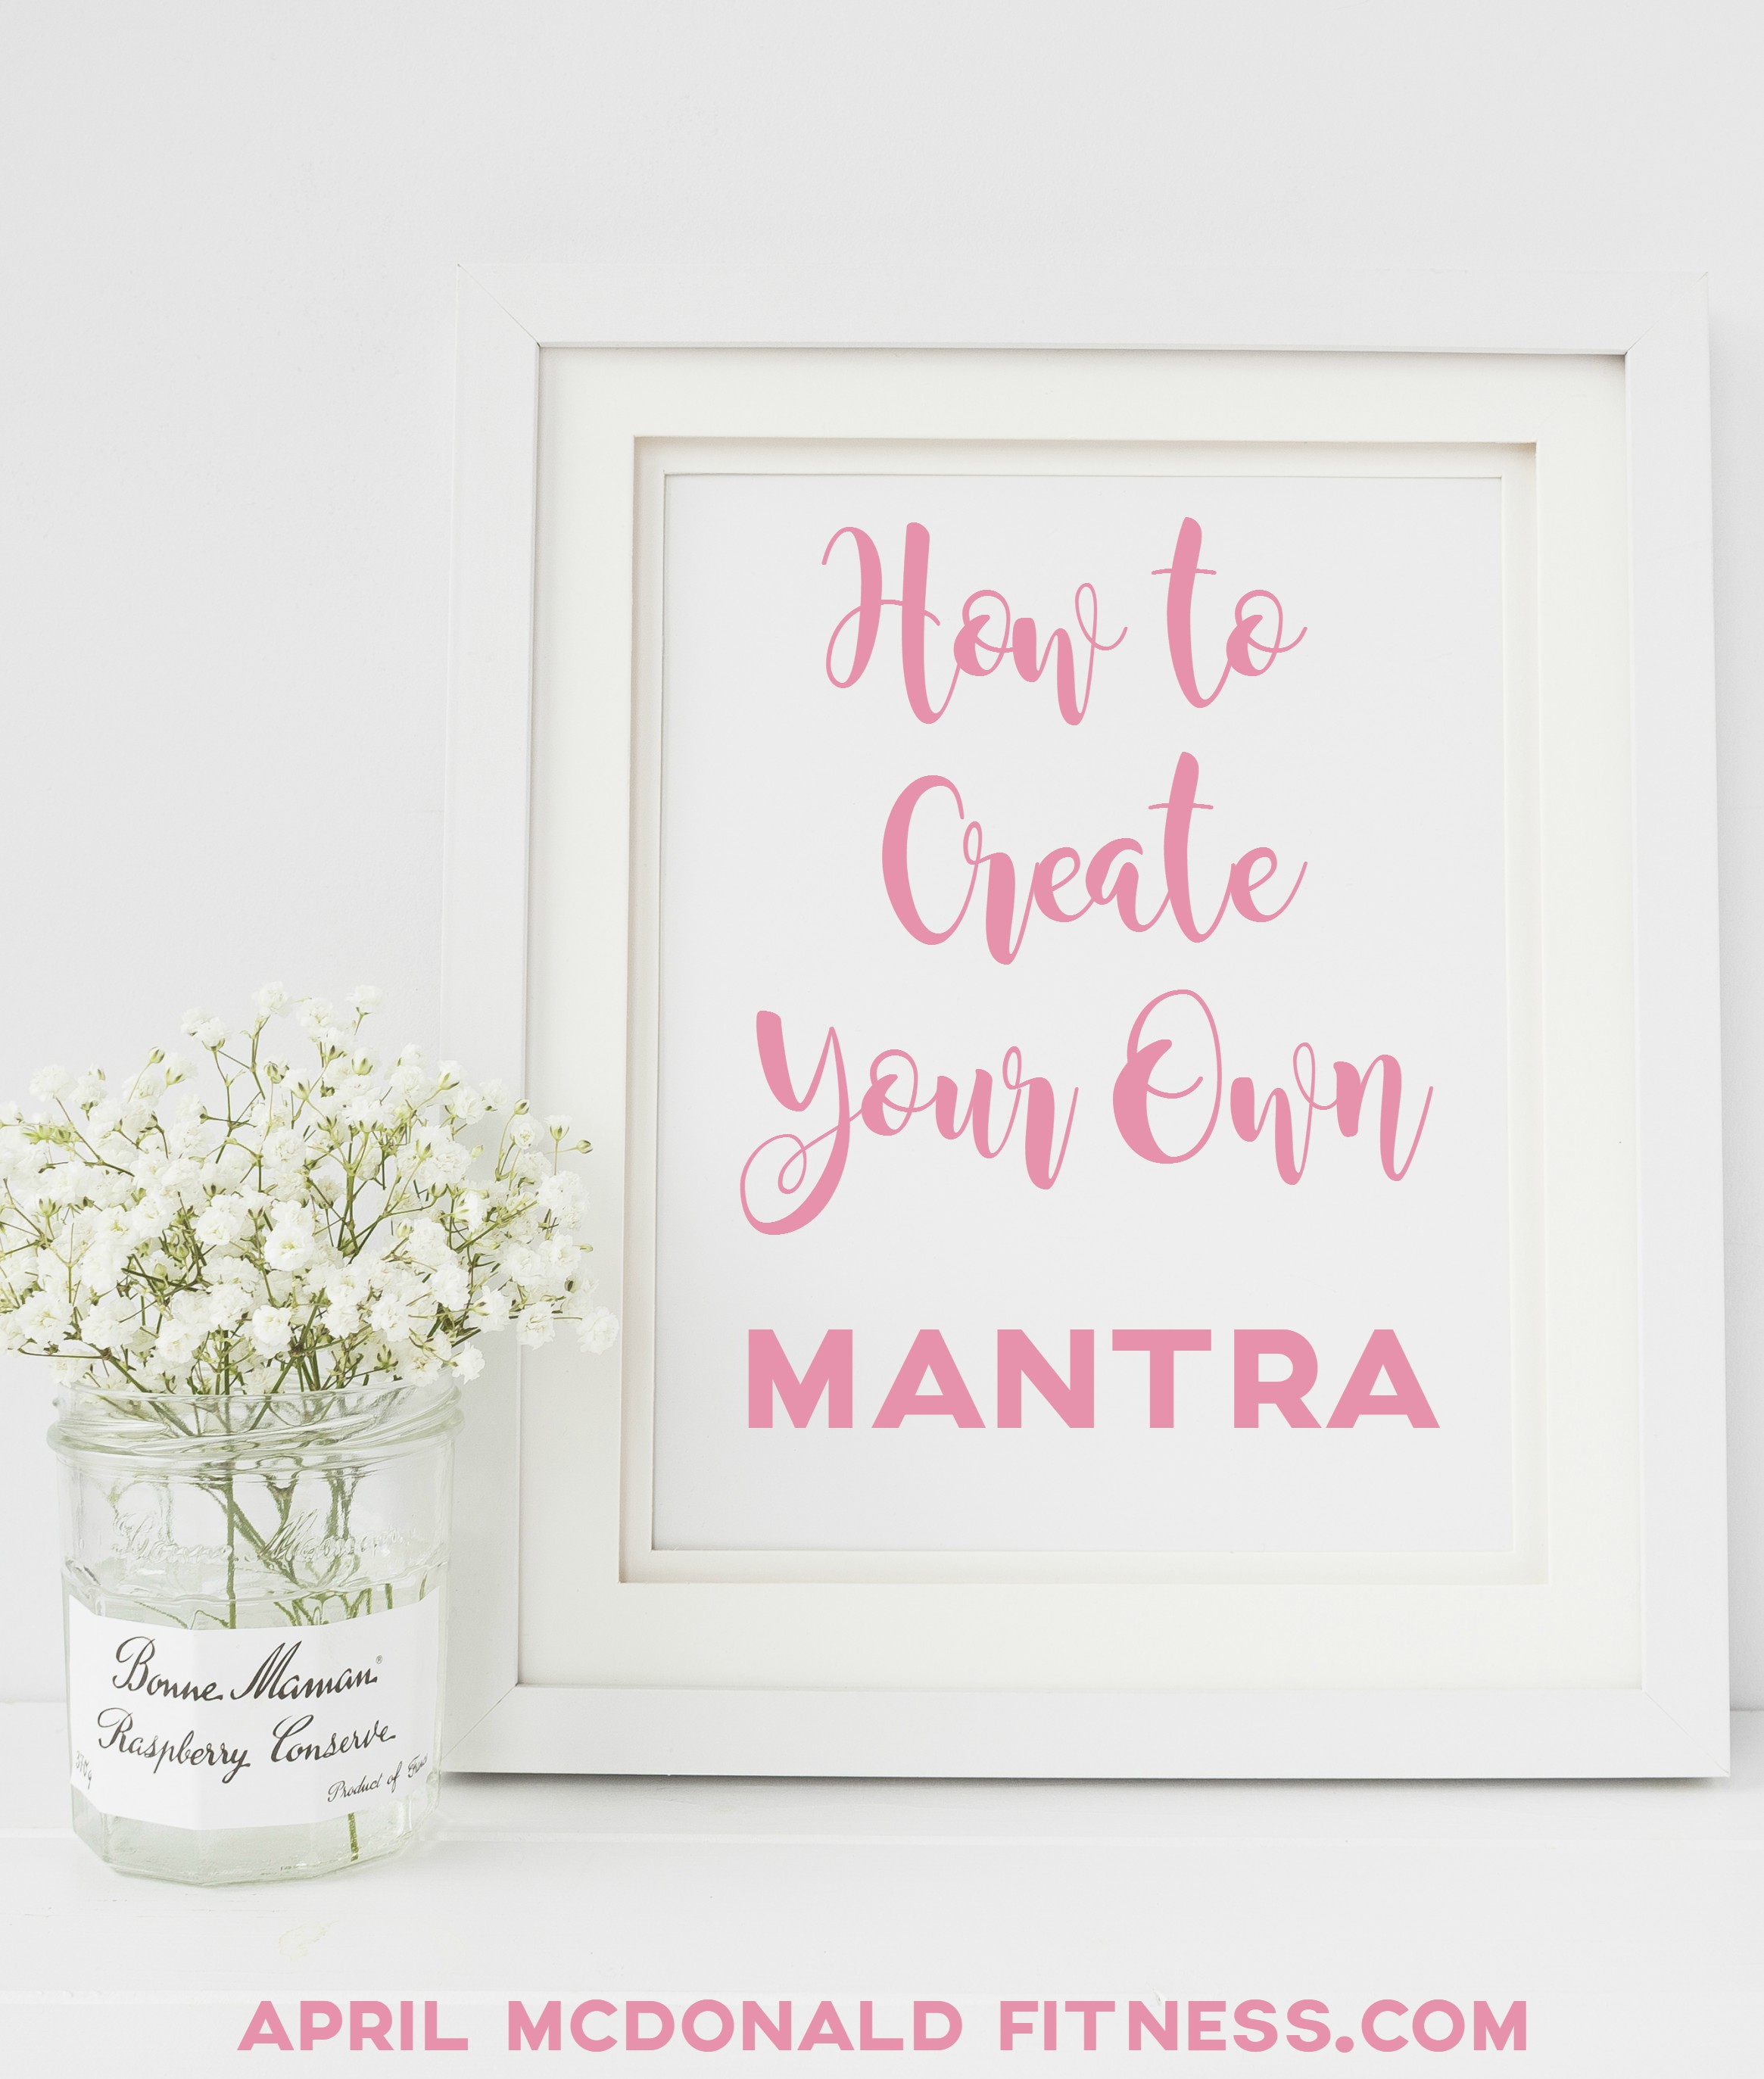 Create your own mantra to help improve your mental and emotional healthy and your overall physical health.